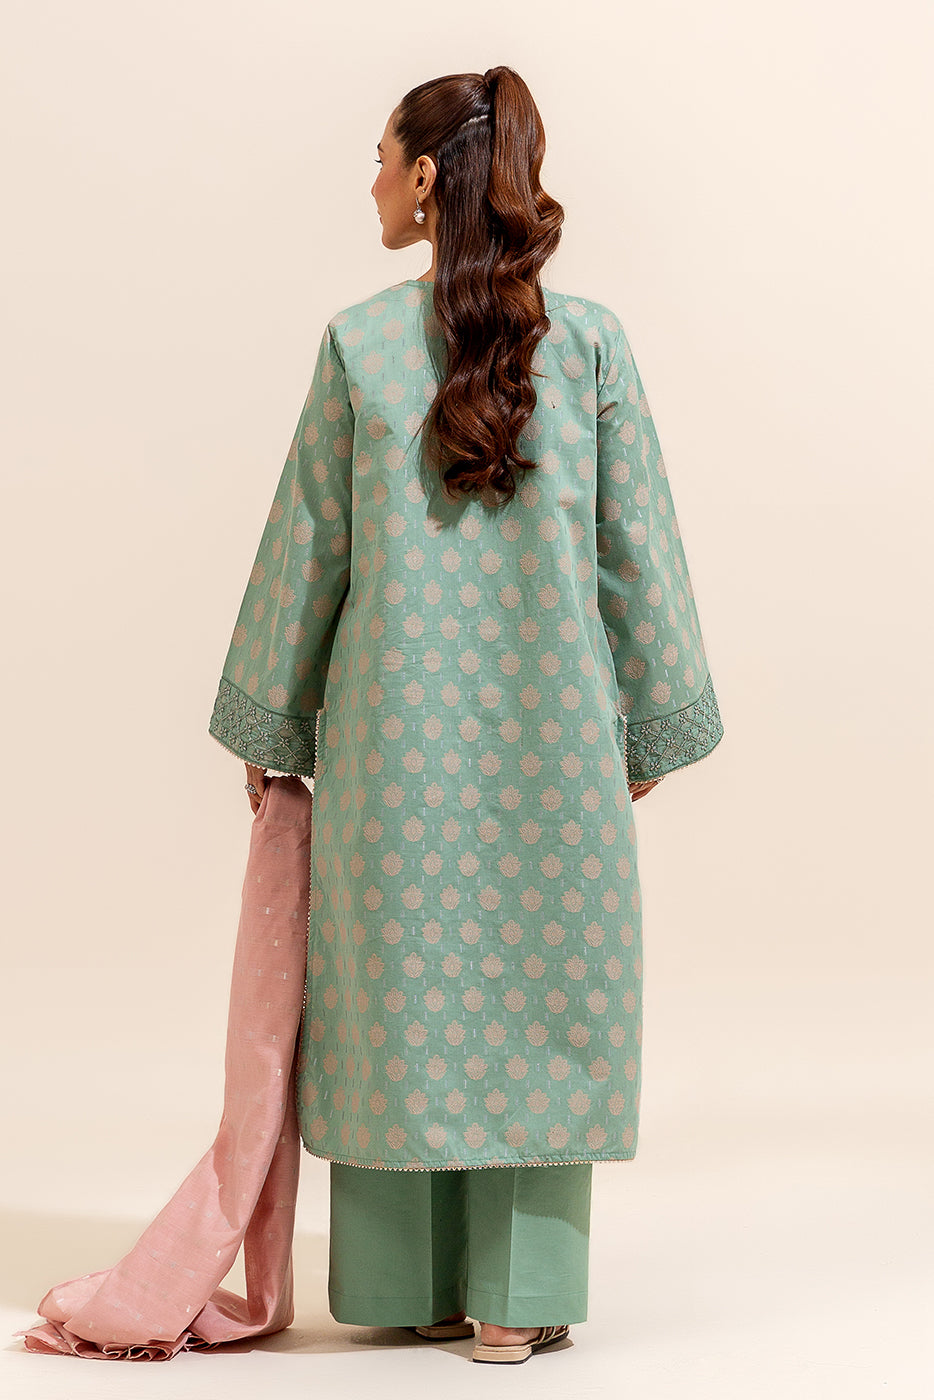 3 PIECE EMBROIDERED JACQUARD SUIT-TURQOISE BLUSH (UNSTITCHED)